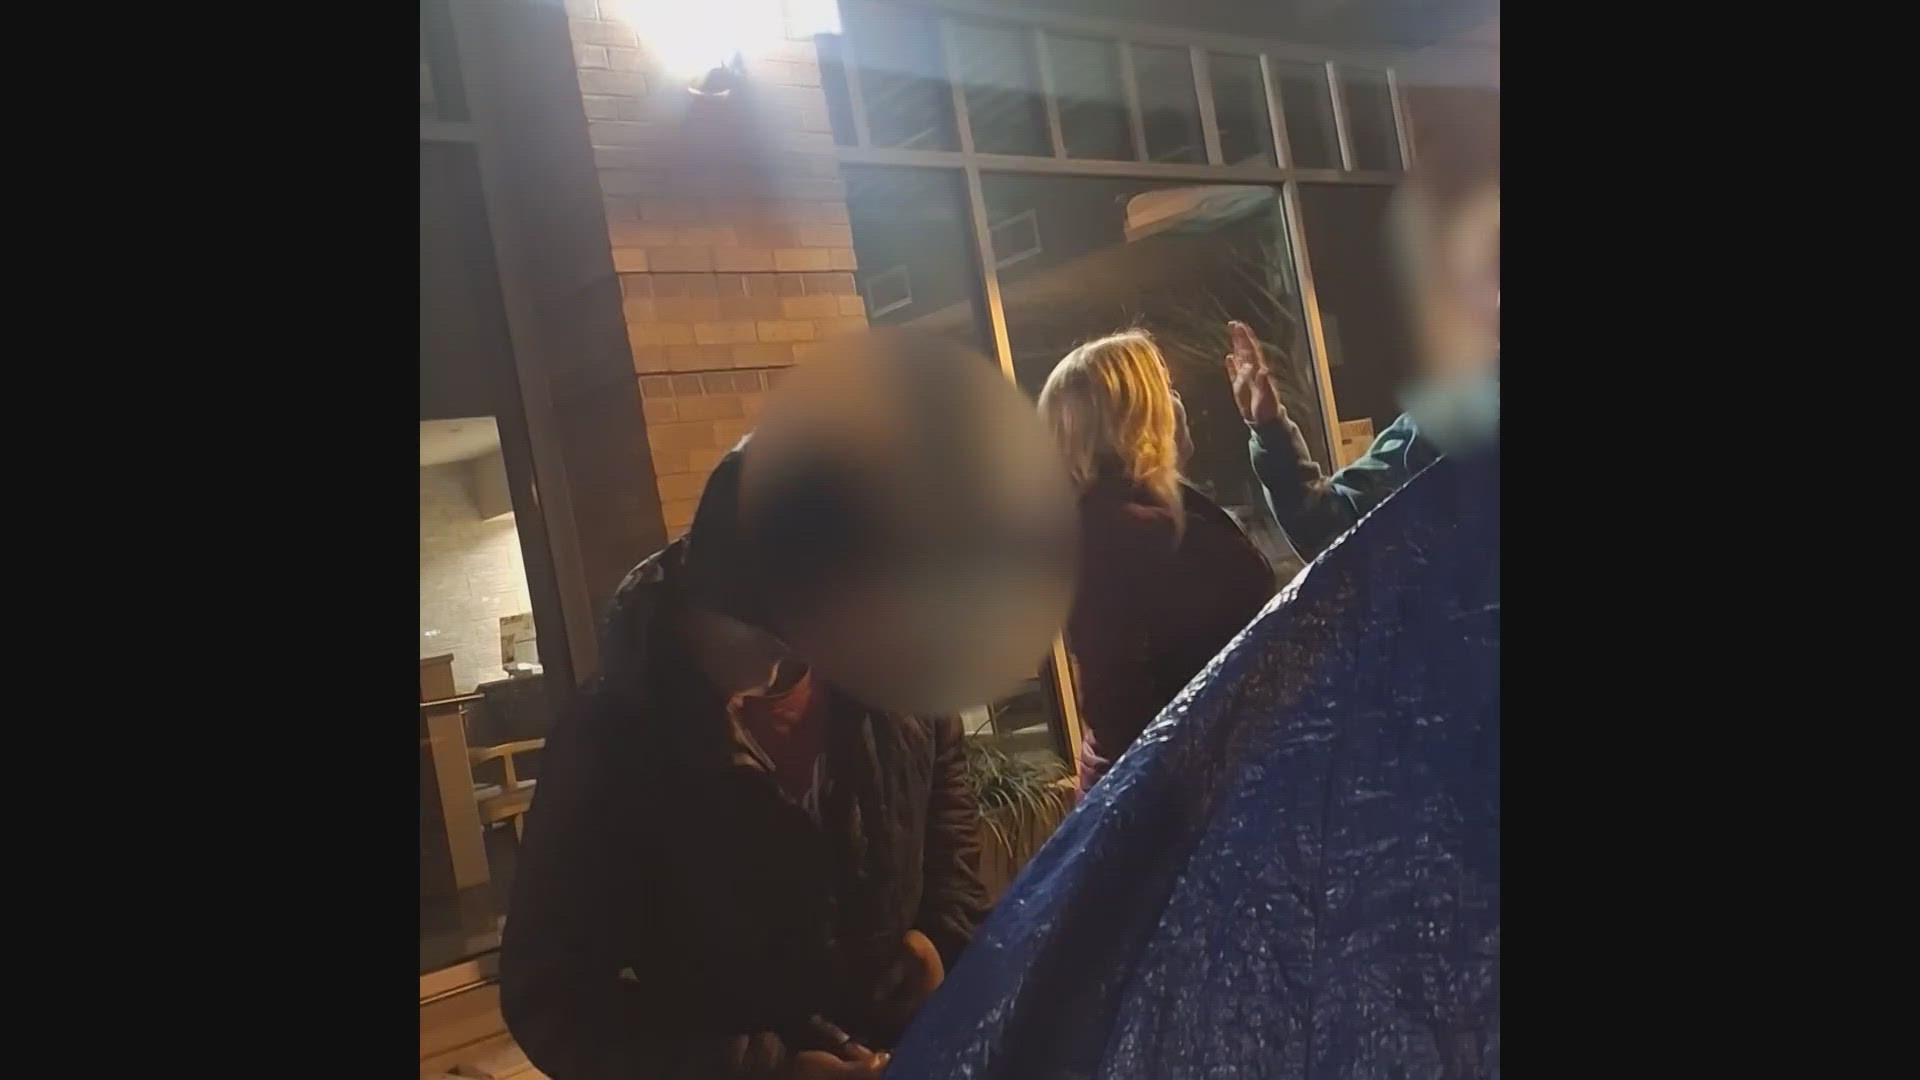 Burien Mayor Kevin Schilling told KING 5 that after the videos were released, he had a conversation with her about needing to have "a more positive approach."